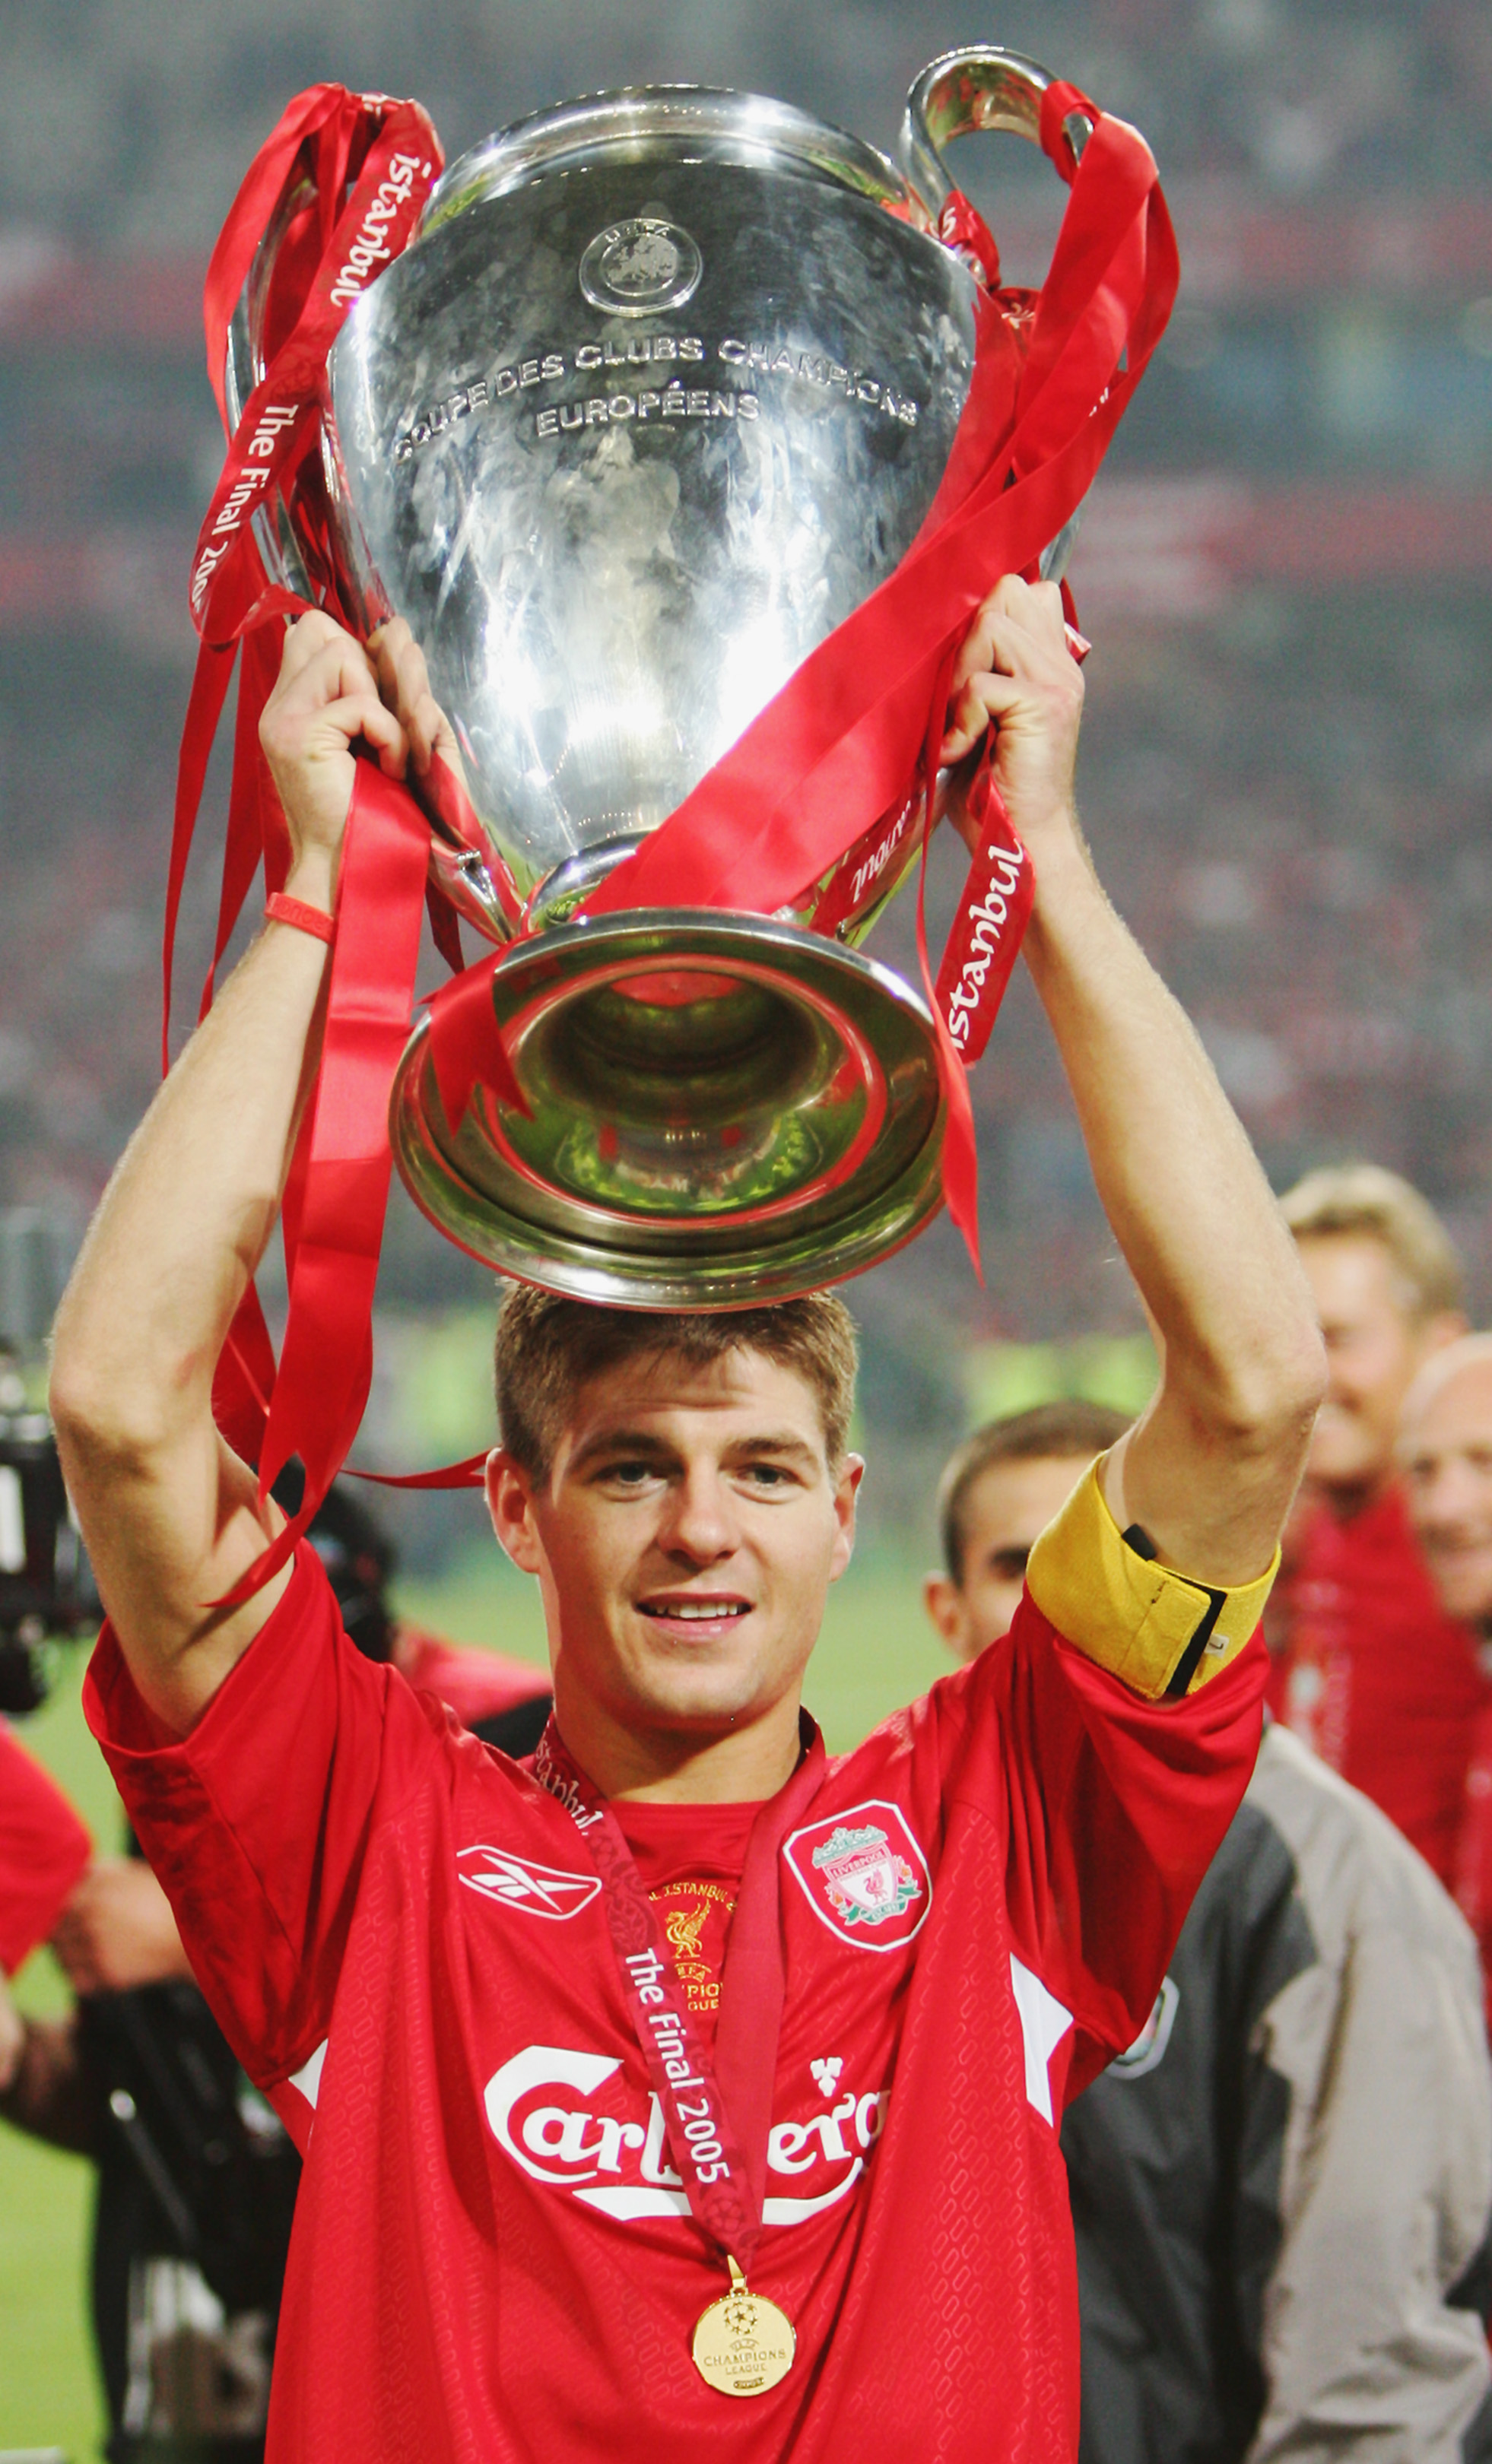 ISTANBUL, TURKEY - MAY 25:  Steven Gerrard of Liverpool celebrates with the trophy following victory in the UEFA Champions League Final between Liverpool and AC Milan on May 25, 2005 at the Ataturk Olympic Stadium in Istanbul, Turkey.  (Photo by Mike Hewi